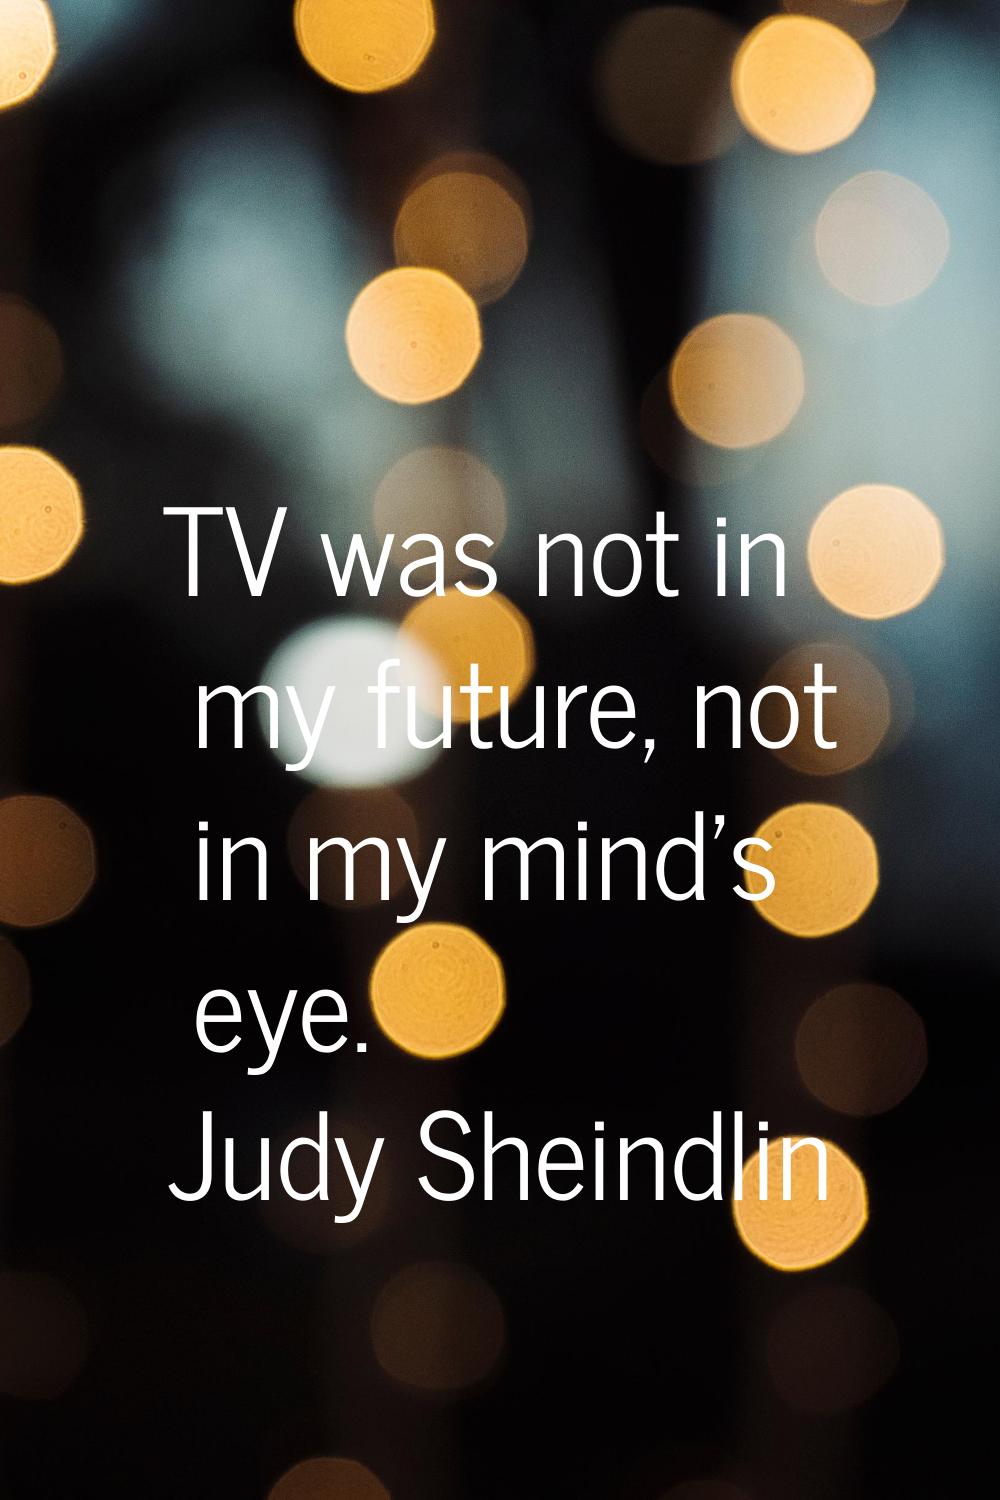 TV was not in my future, not in my mind's eye.